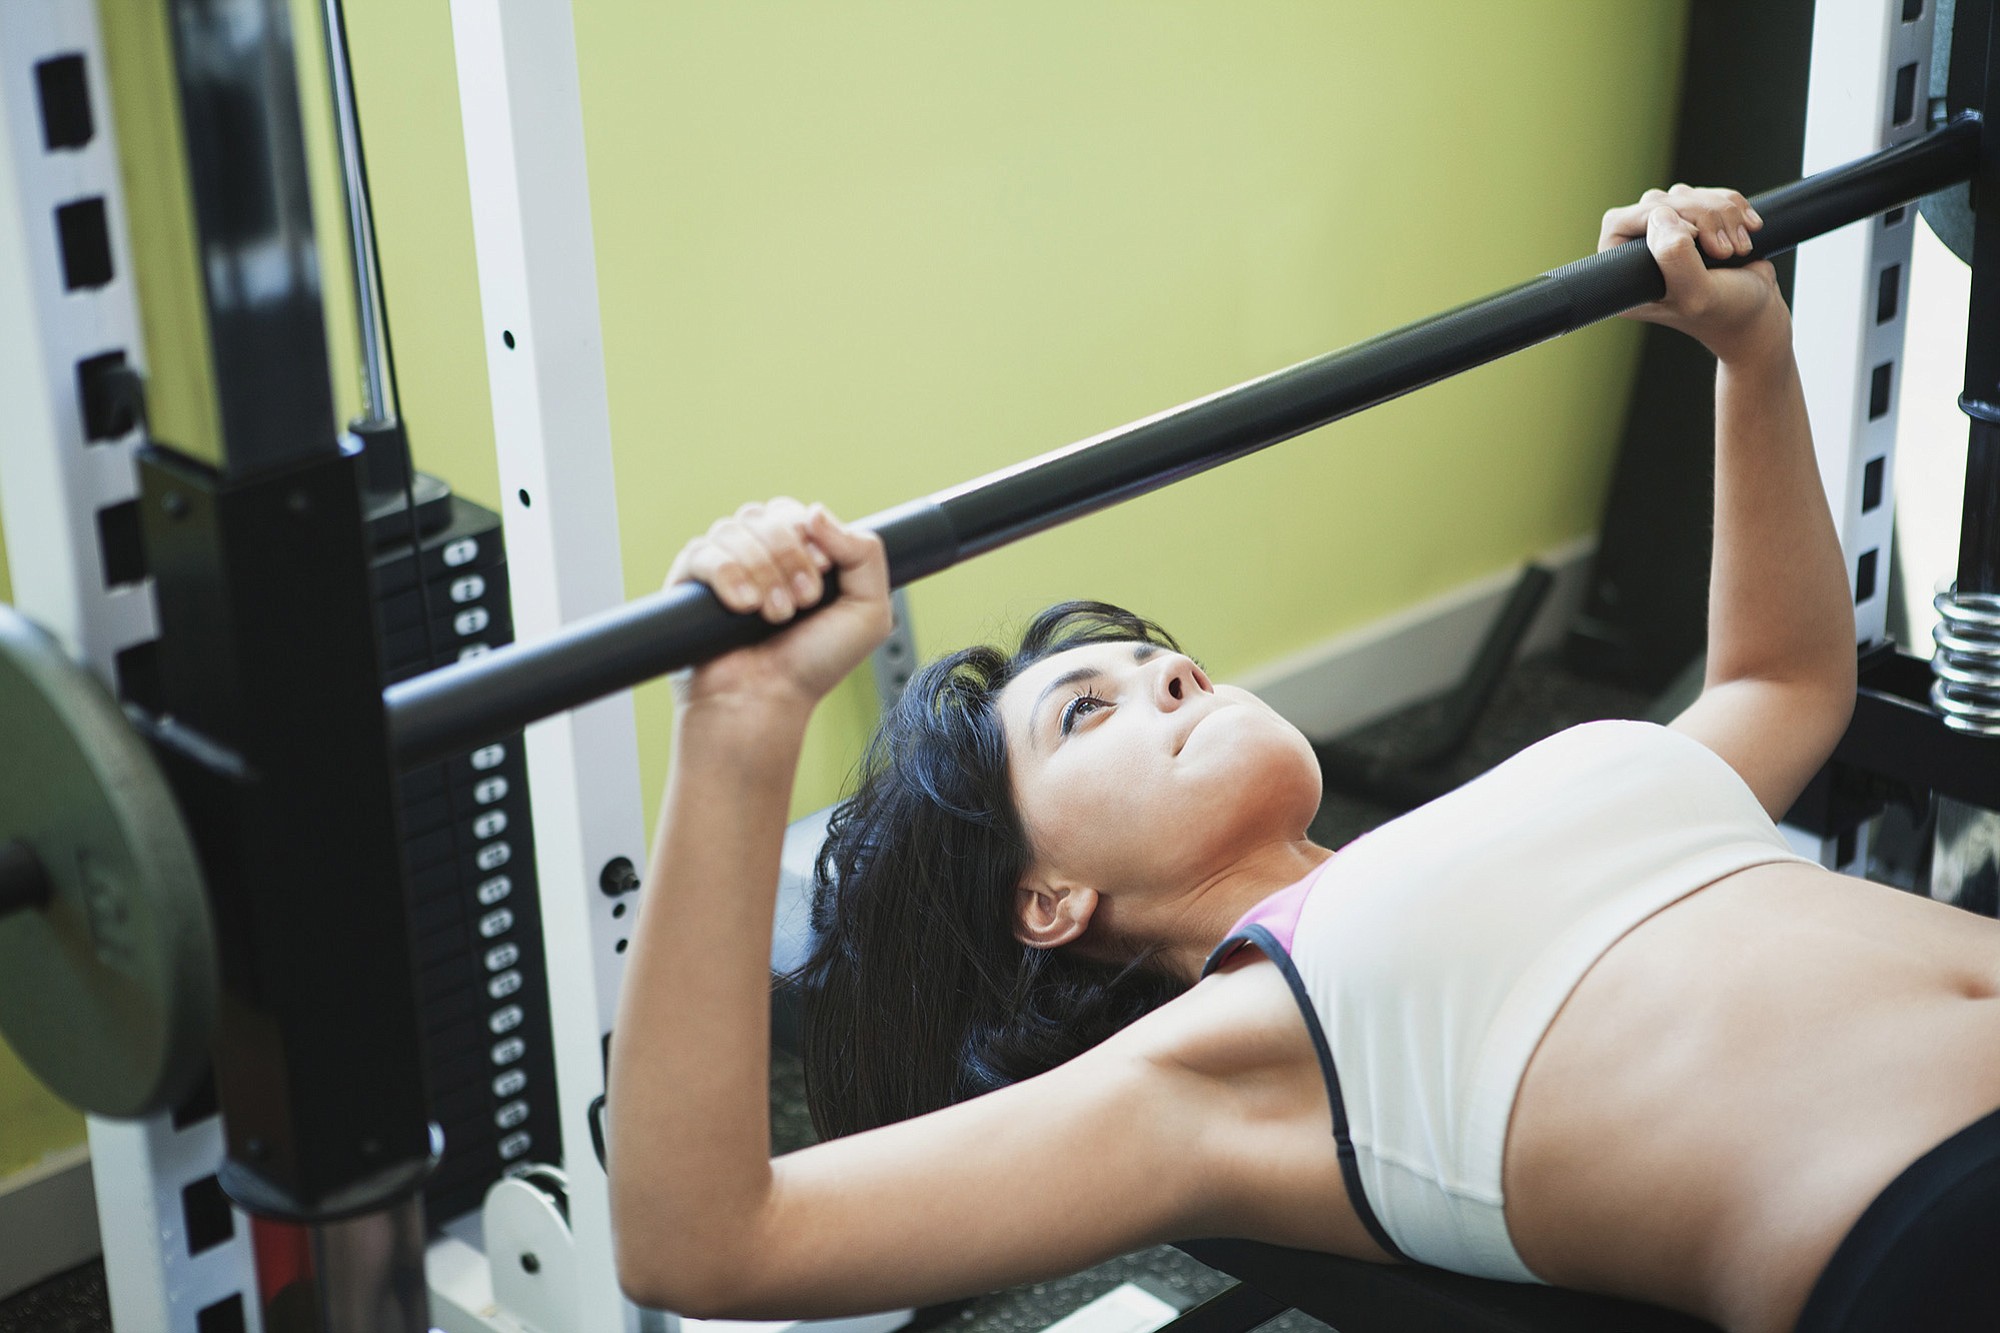 While at the gym, don't hog several machines or weights at once.